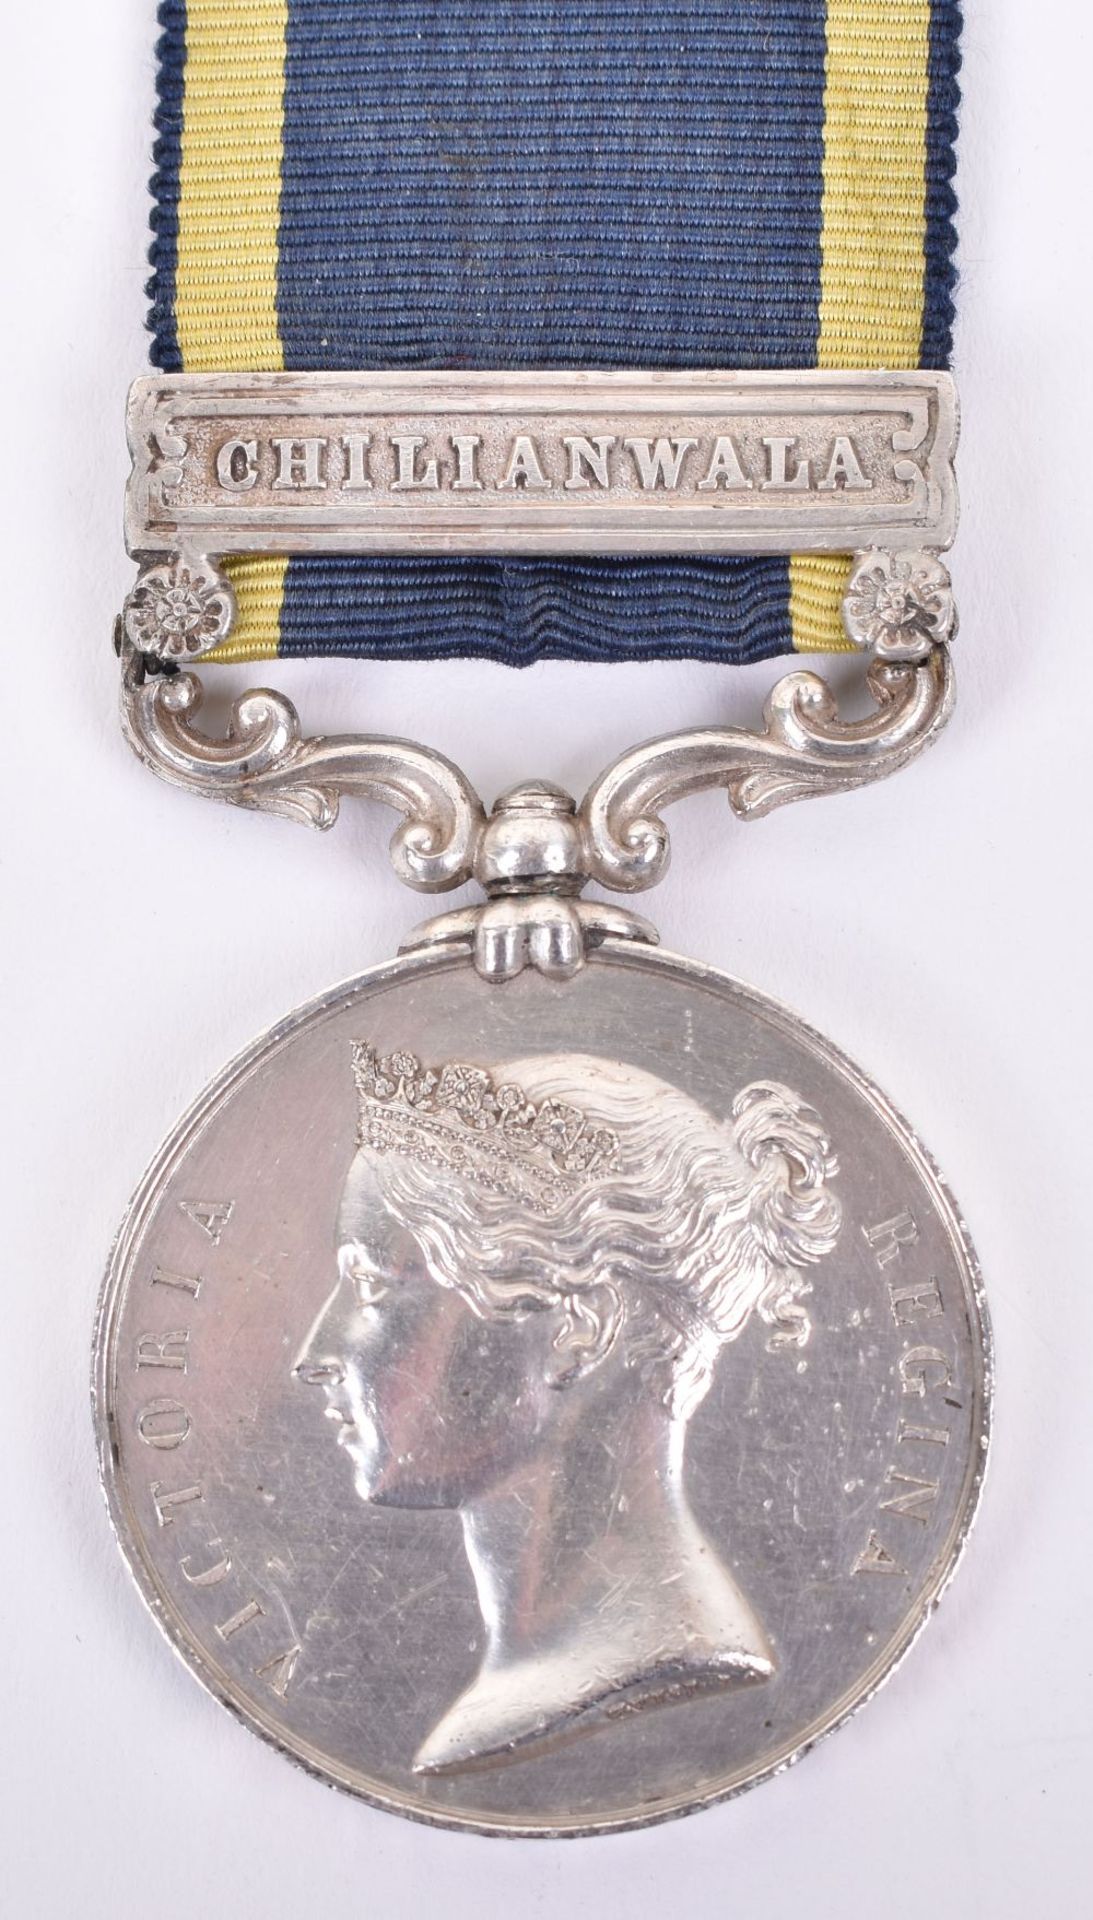 Punjab 1848-49 Campaign Medal 24th Regiment of Foot Killed in Action at the Battle of Chilianwala